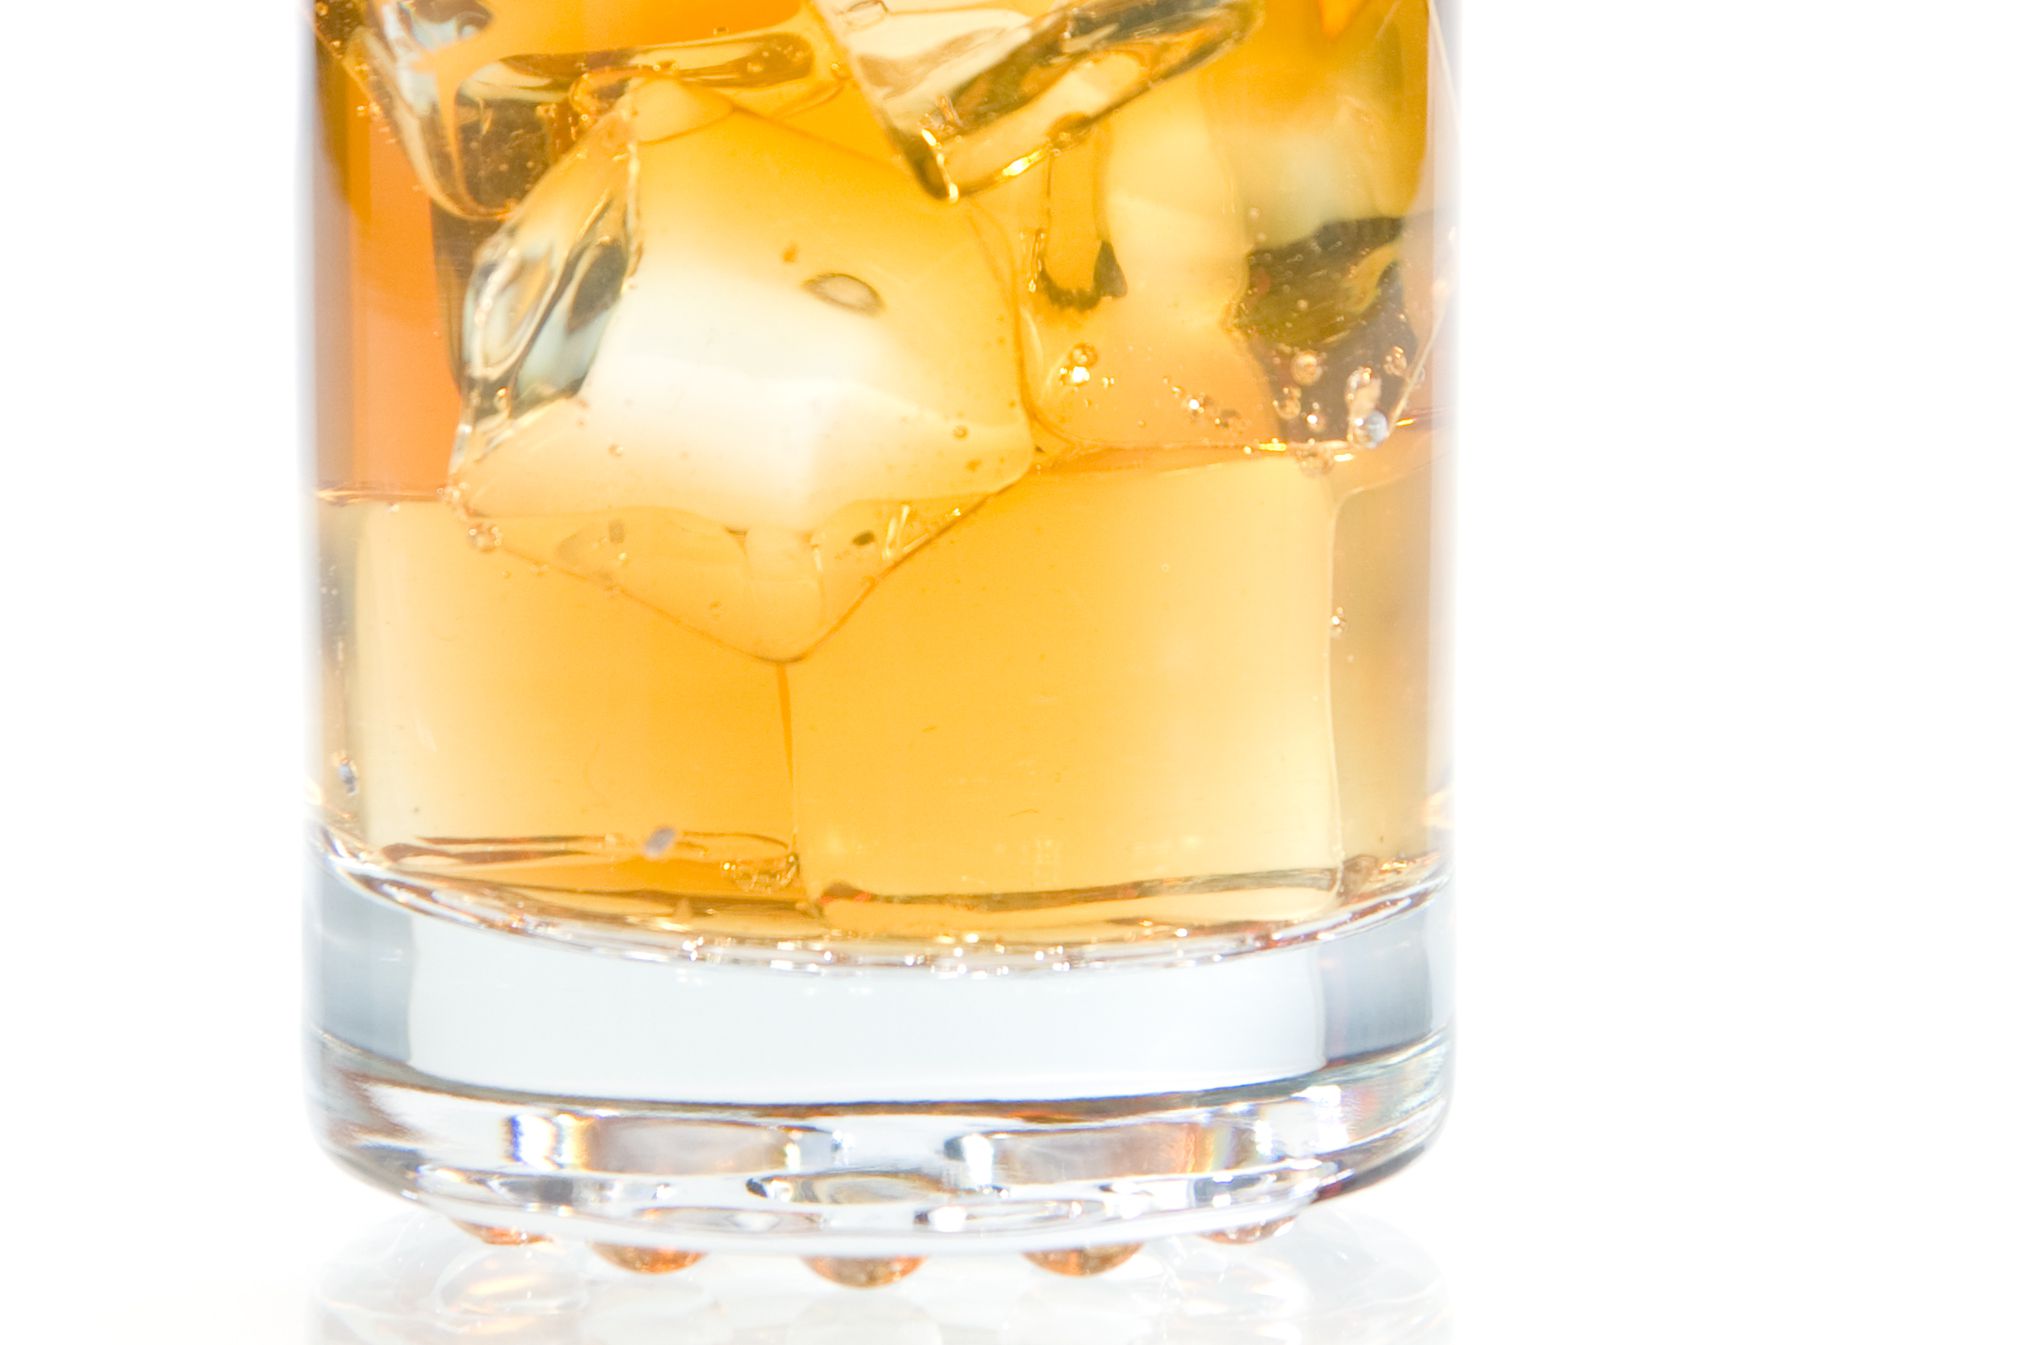 How to Make the Best Scotch & Soda